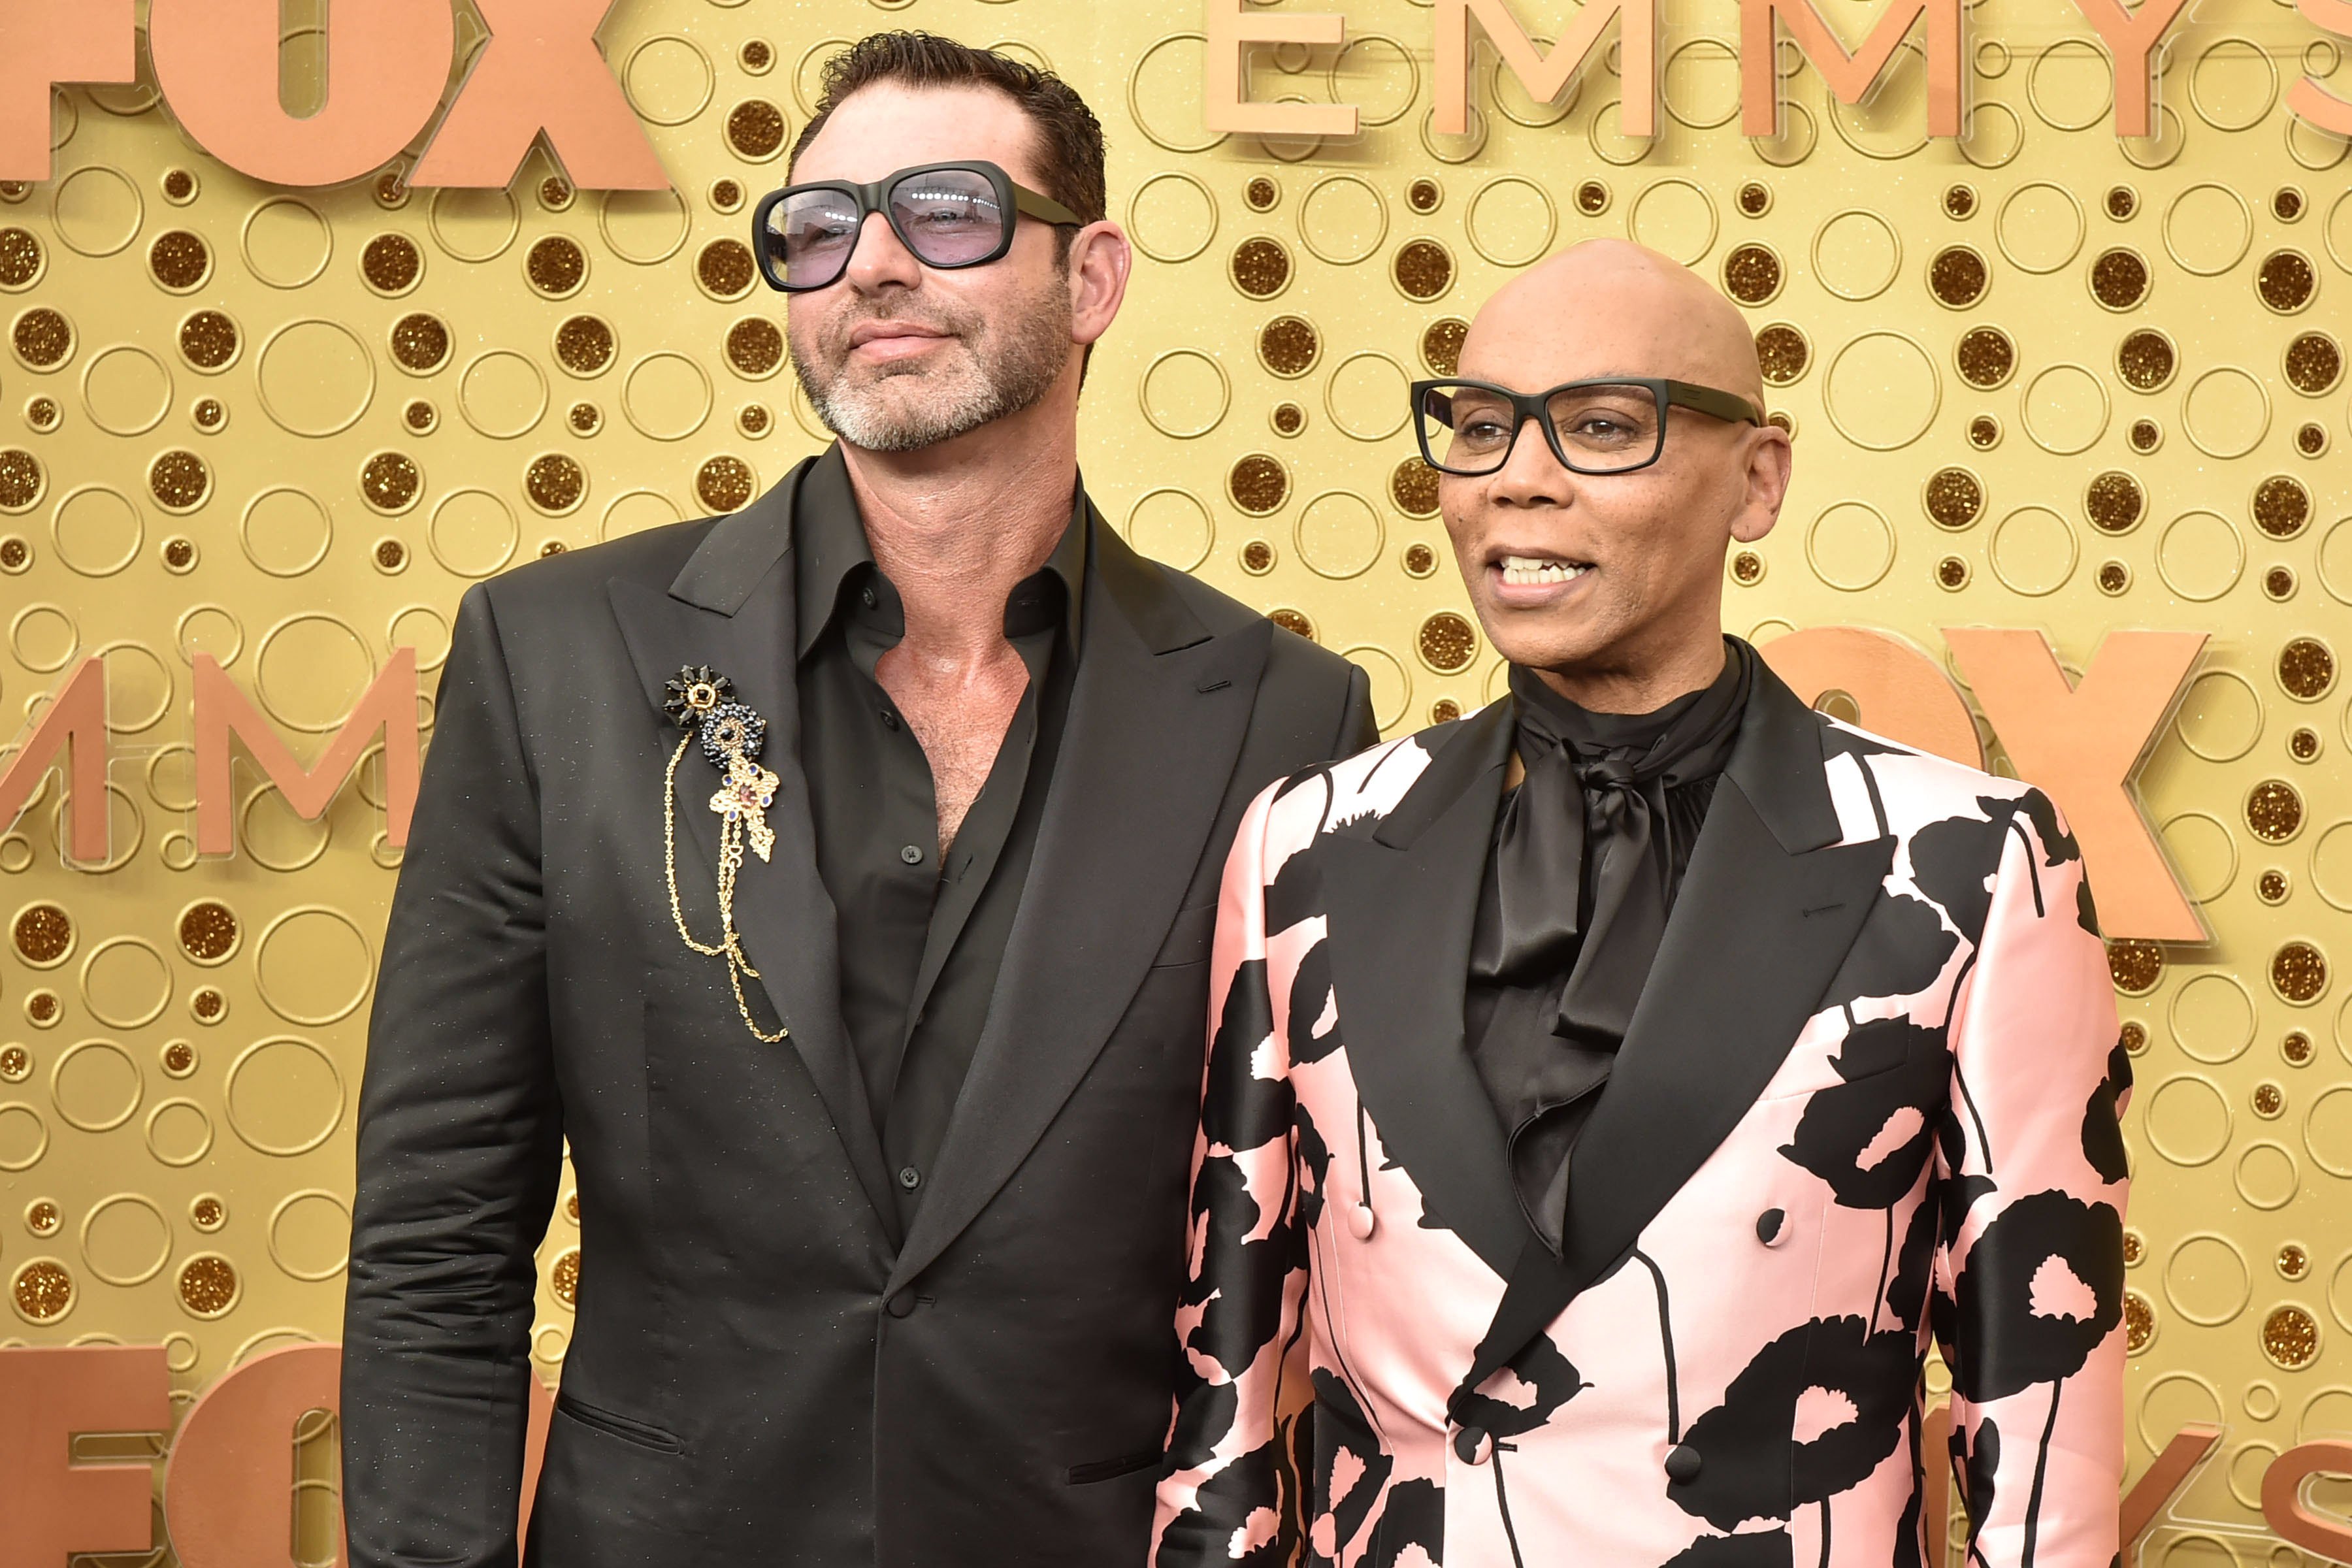 Visual artist Georges LeBar and his husband, Drag Race star RuPaul, at the 2019 Emmy Awards in Los Angeles, California. Photos: Getty Images